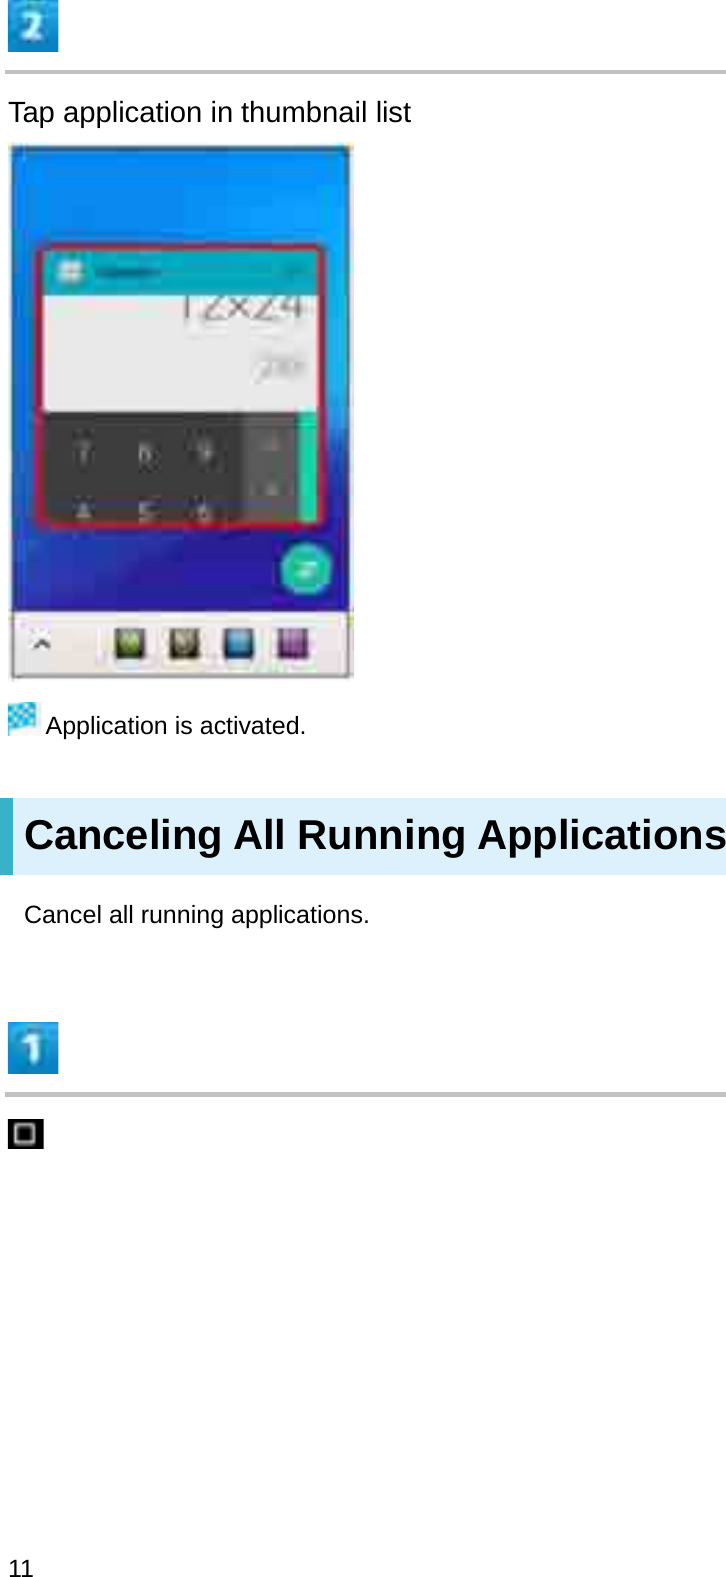 Tap application in thumbnail listApplication is activated.Canceling All Running ApplicationsCancel all running applications.11